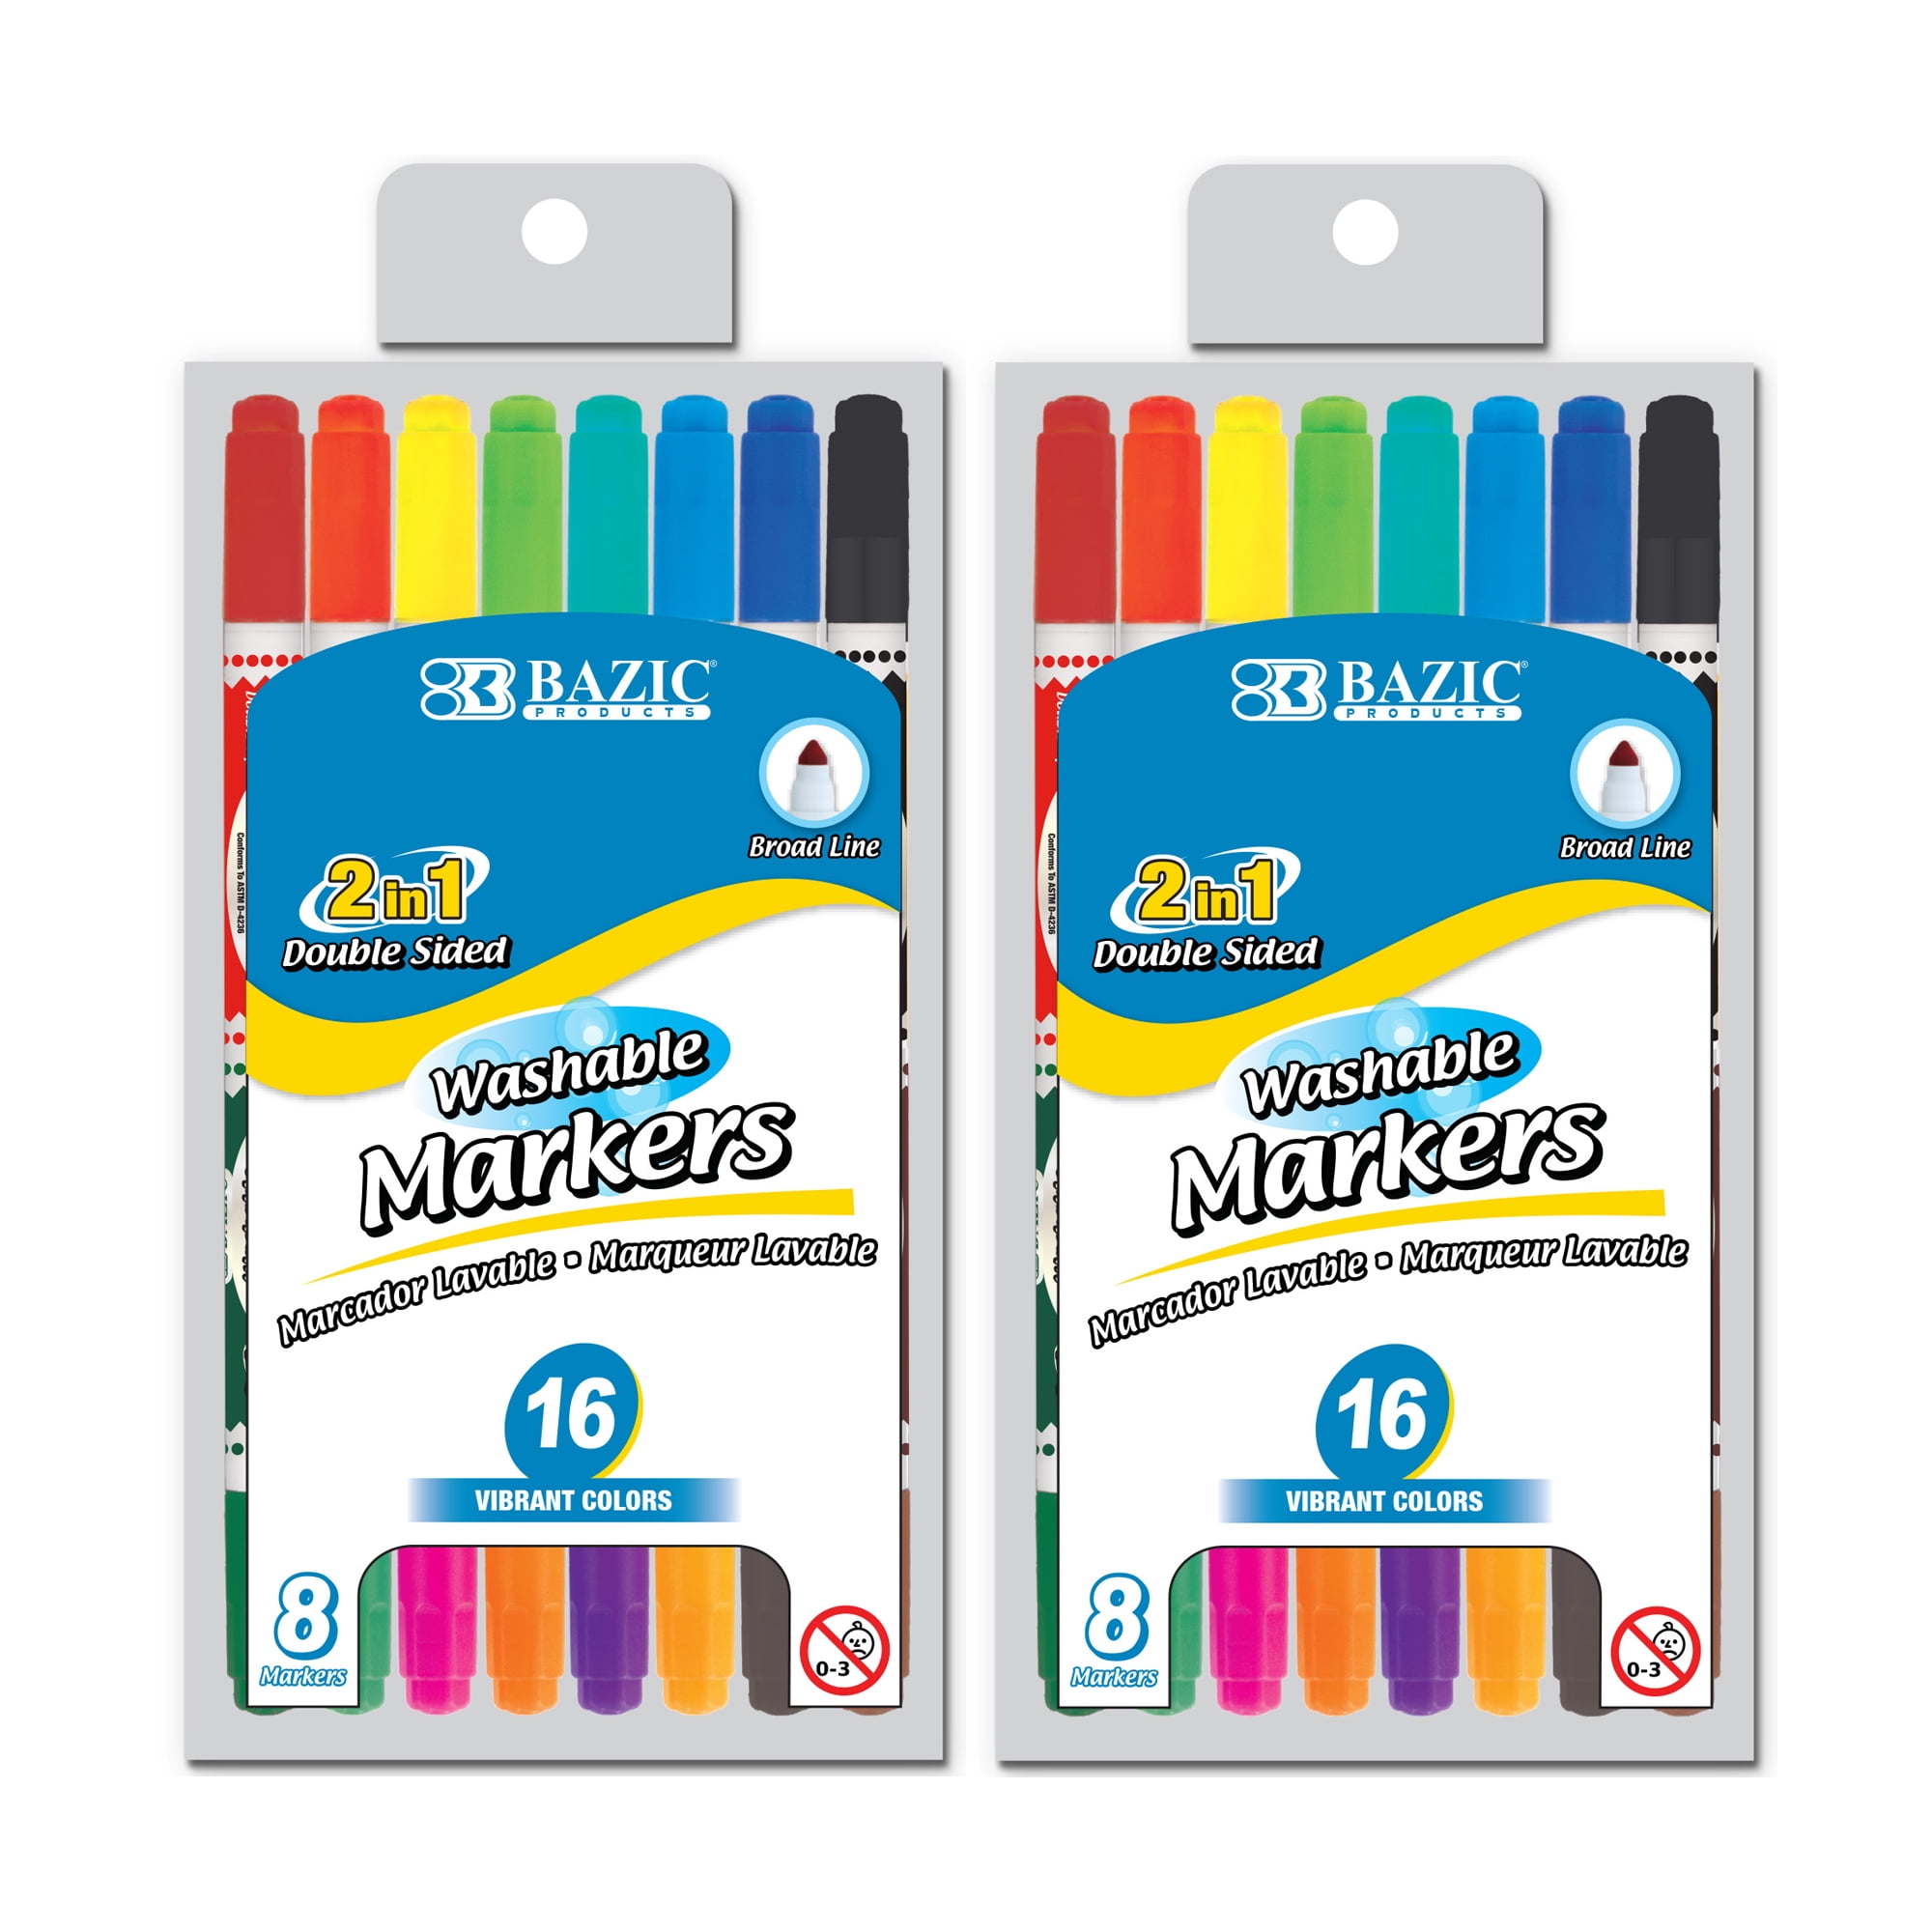 Lebze Washable Markers for Kids Ages 2-4 Years, Algeria